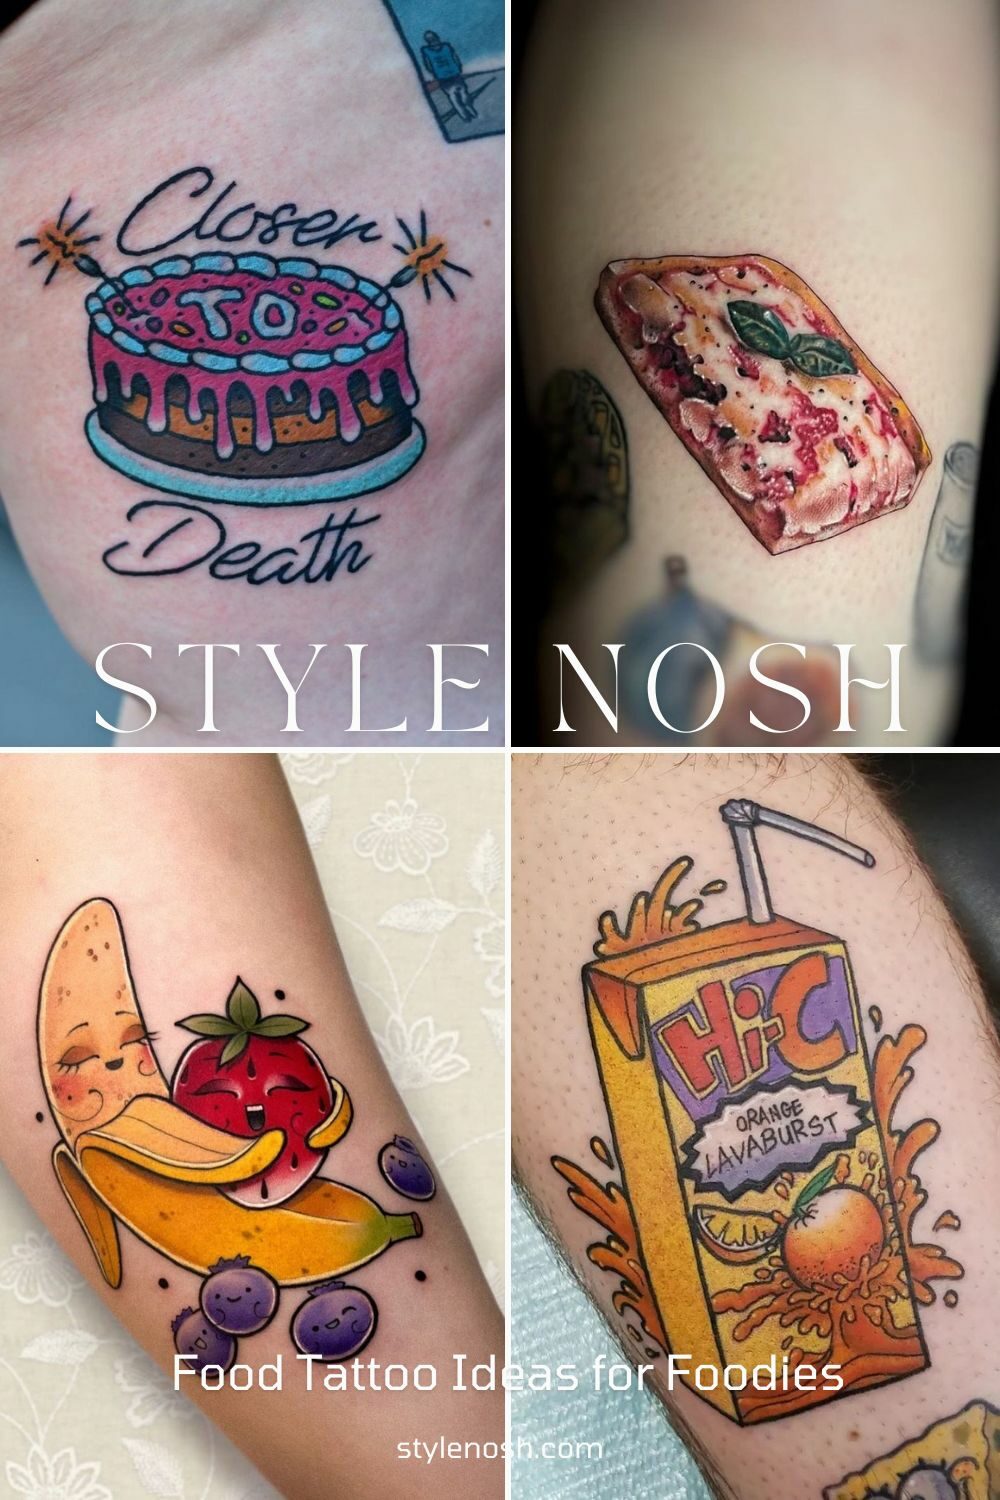 You can get a tasty food tattoos if you have a passion for baking and decorating baked goods